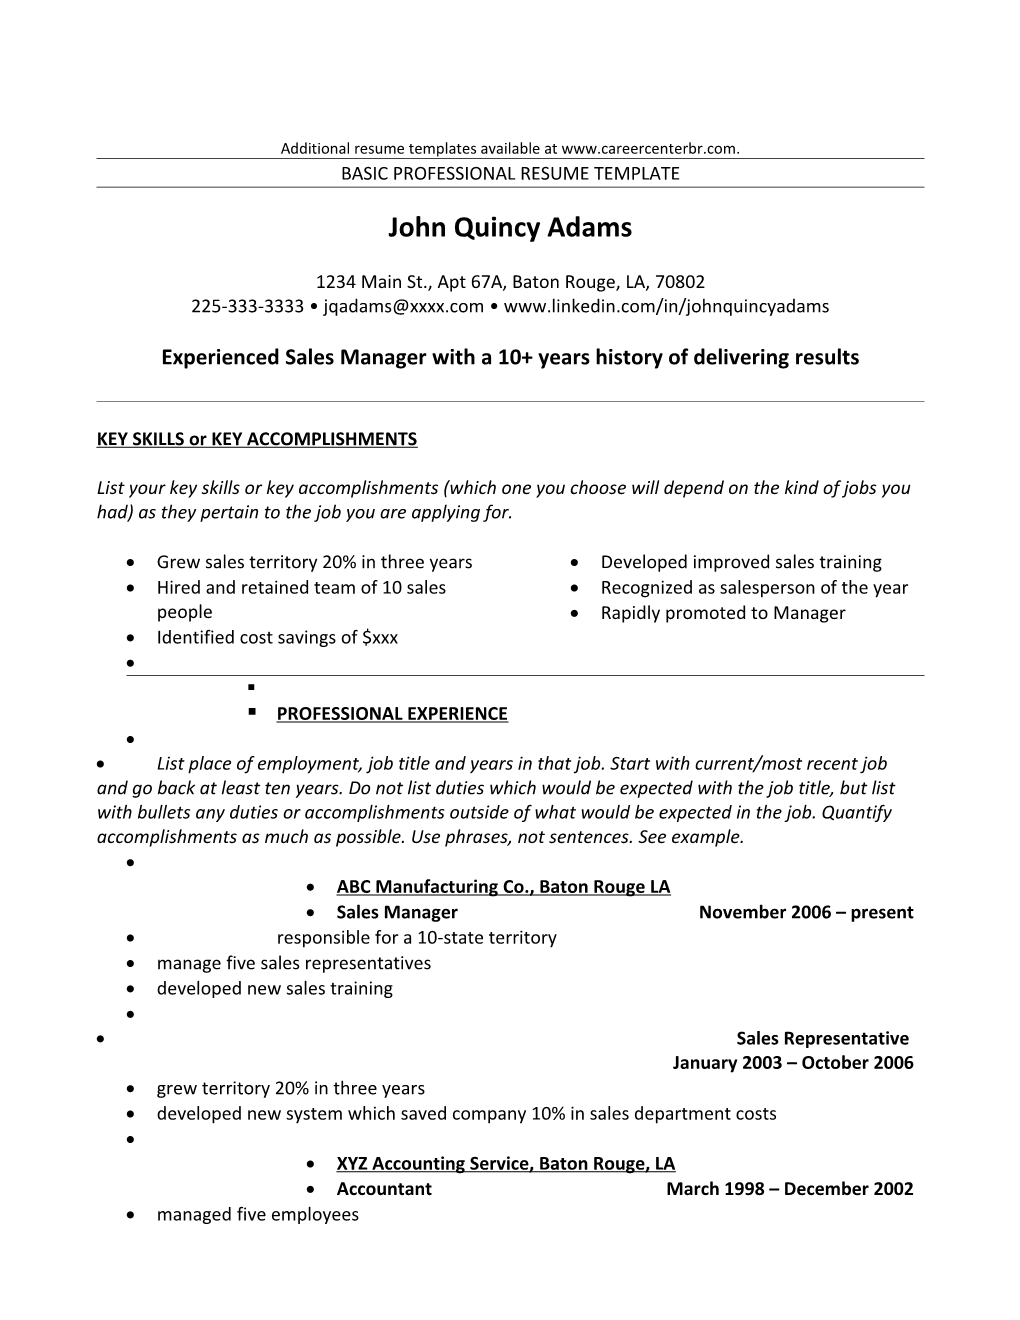 Resume Template for Career Center Clients